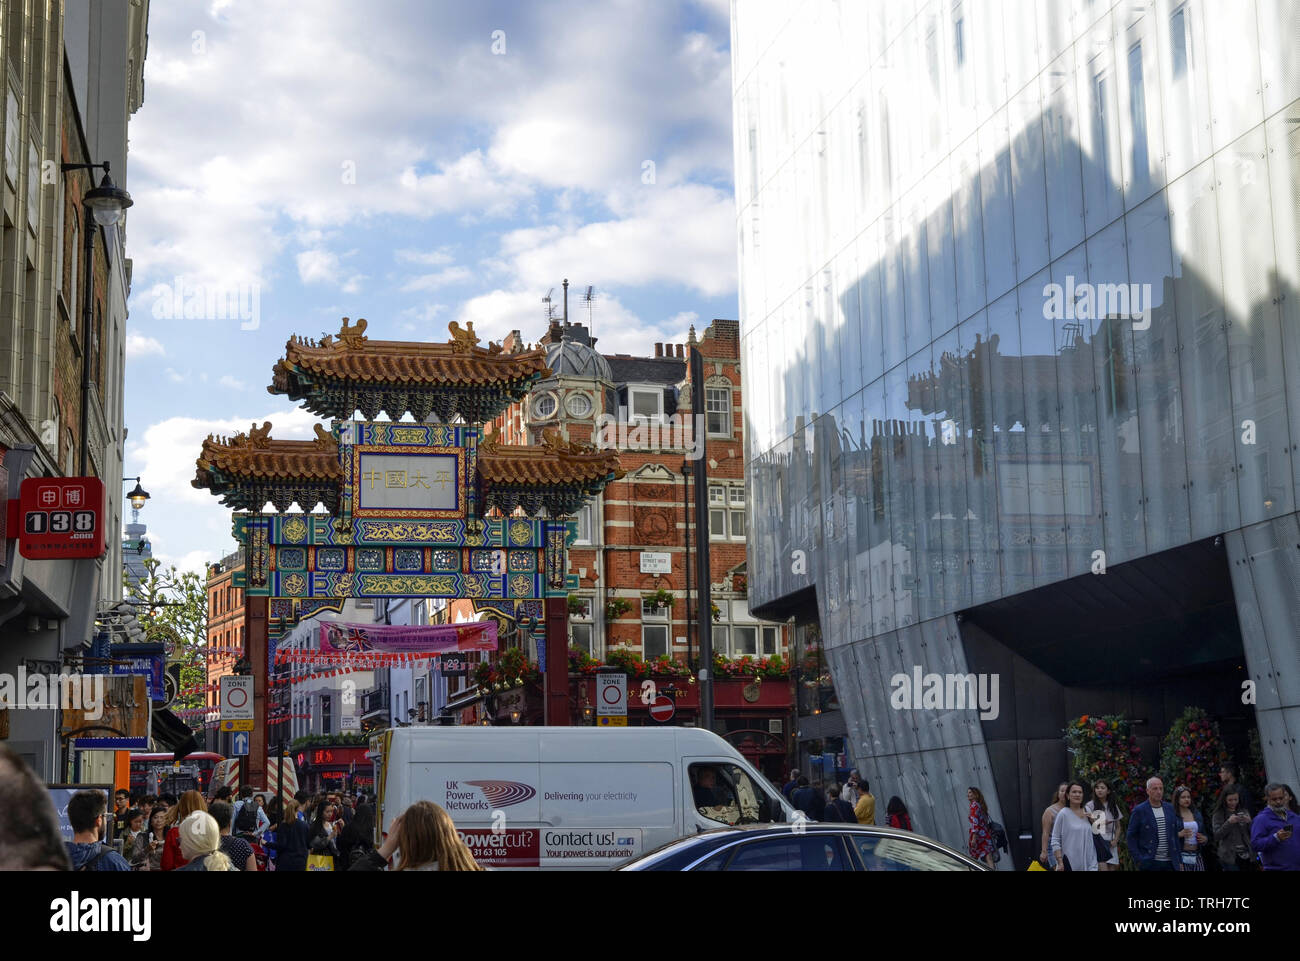 London, United Kingdom, June 14 2018. Chinatown, the historic Chinese district of London. The pagoda gate of access to the neighborhood is unmistakabl Stock Photo